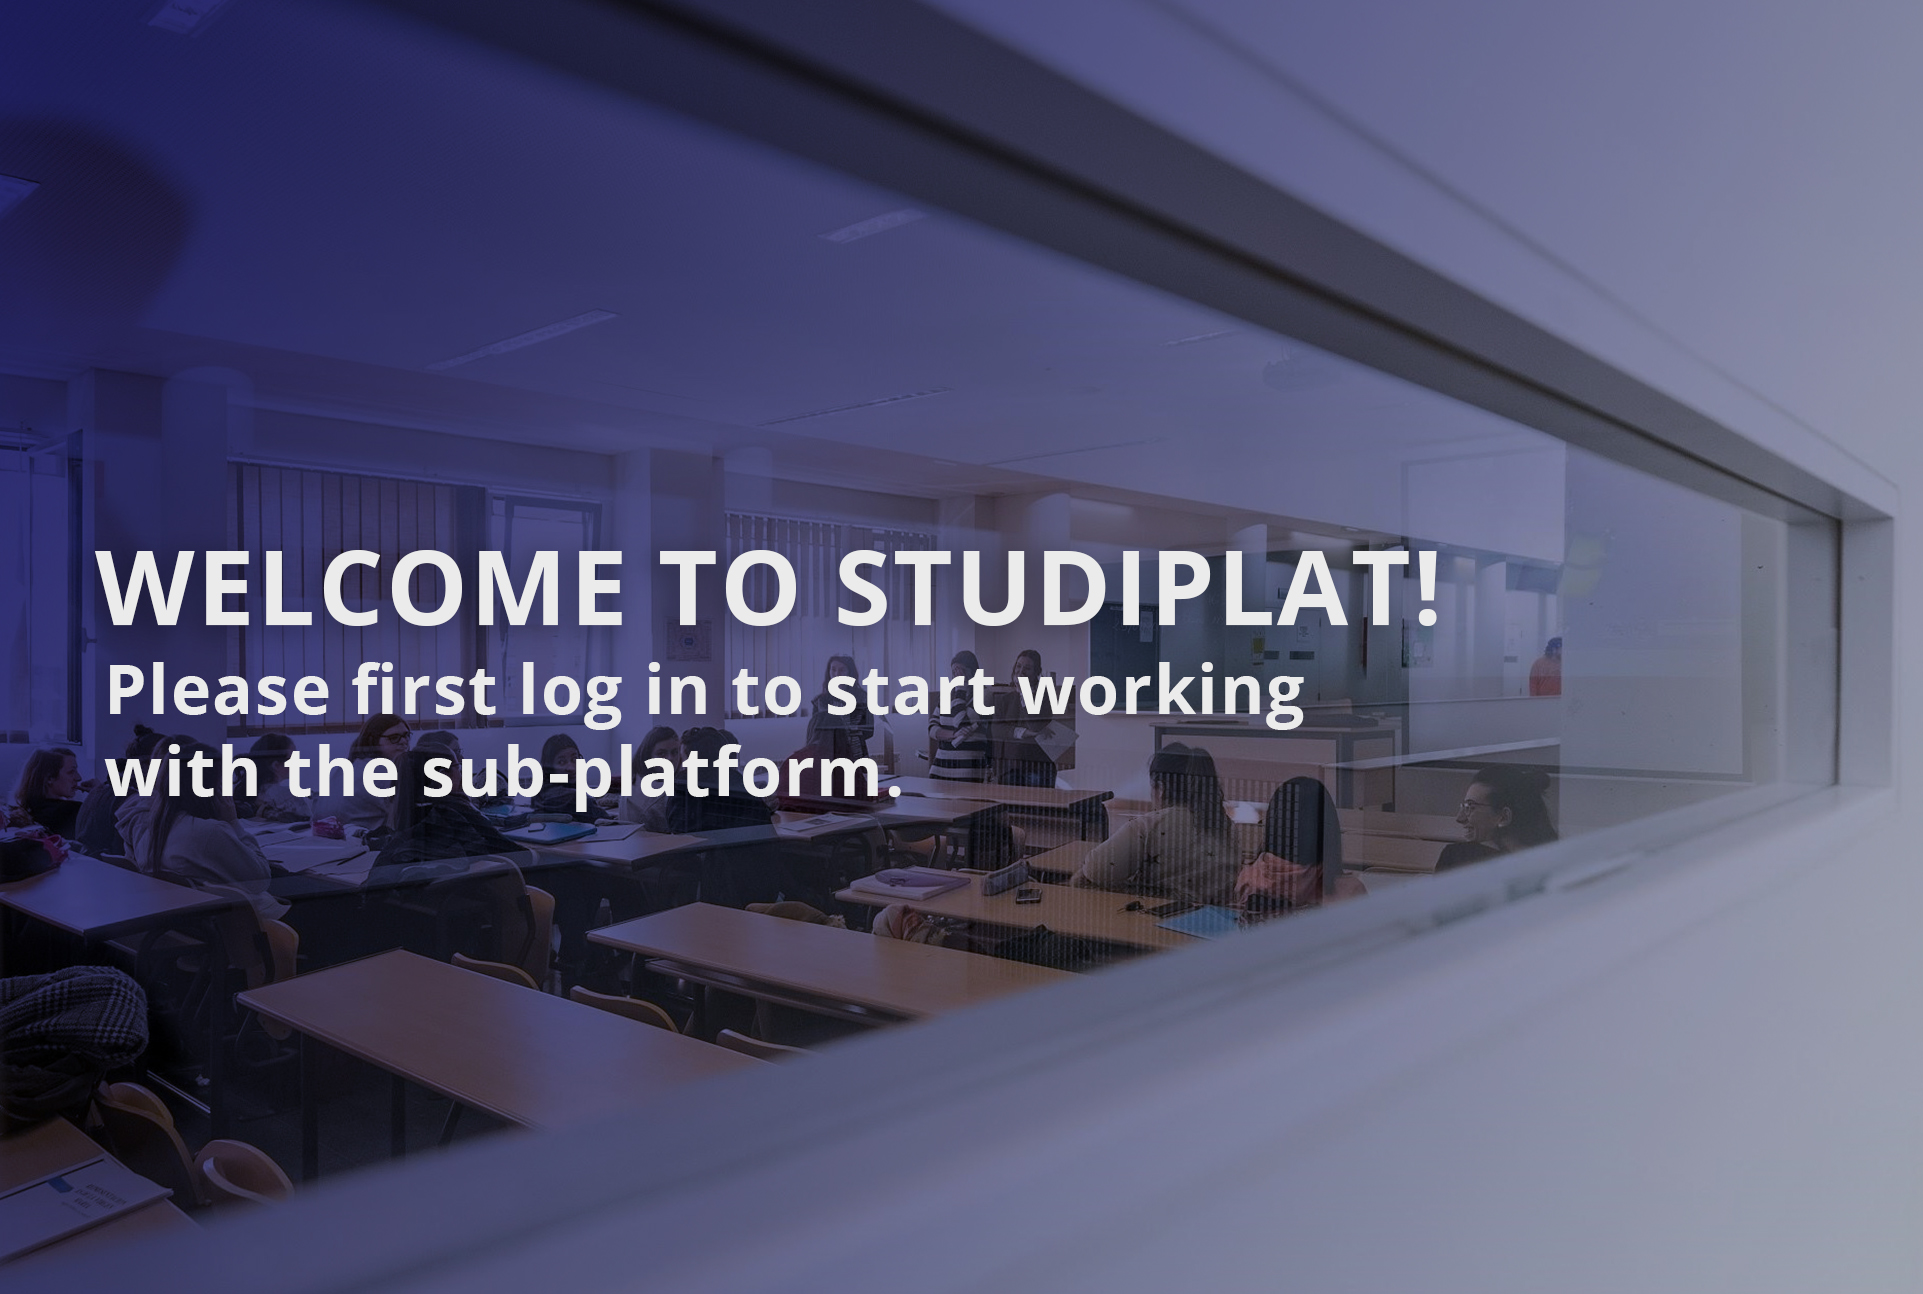 Welcome to StuDiPlat! Please first log in to start working with the sub-platform.